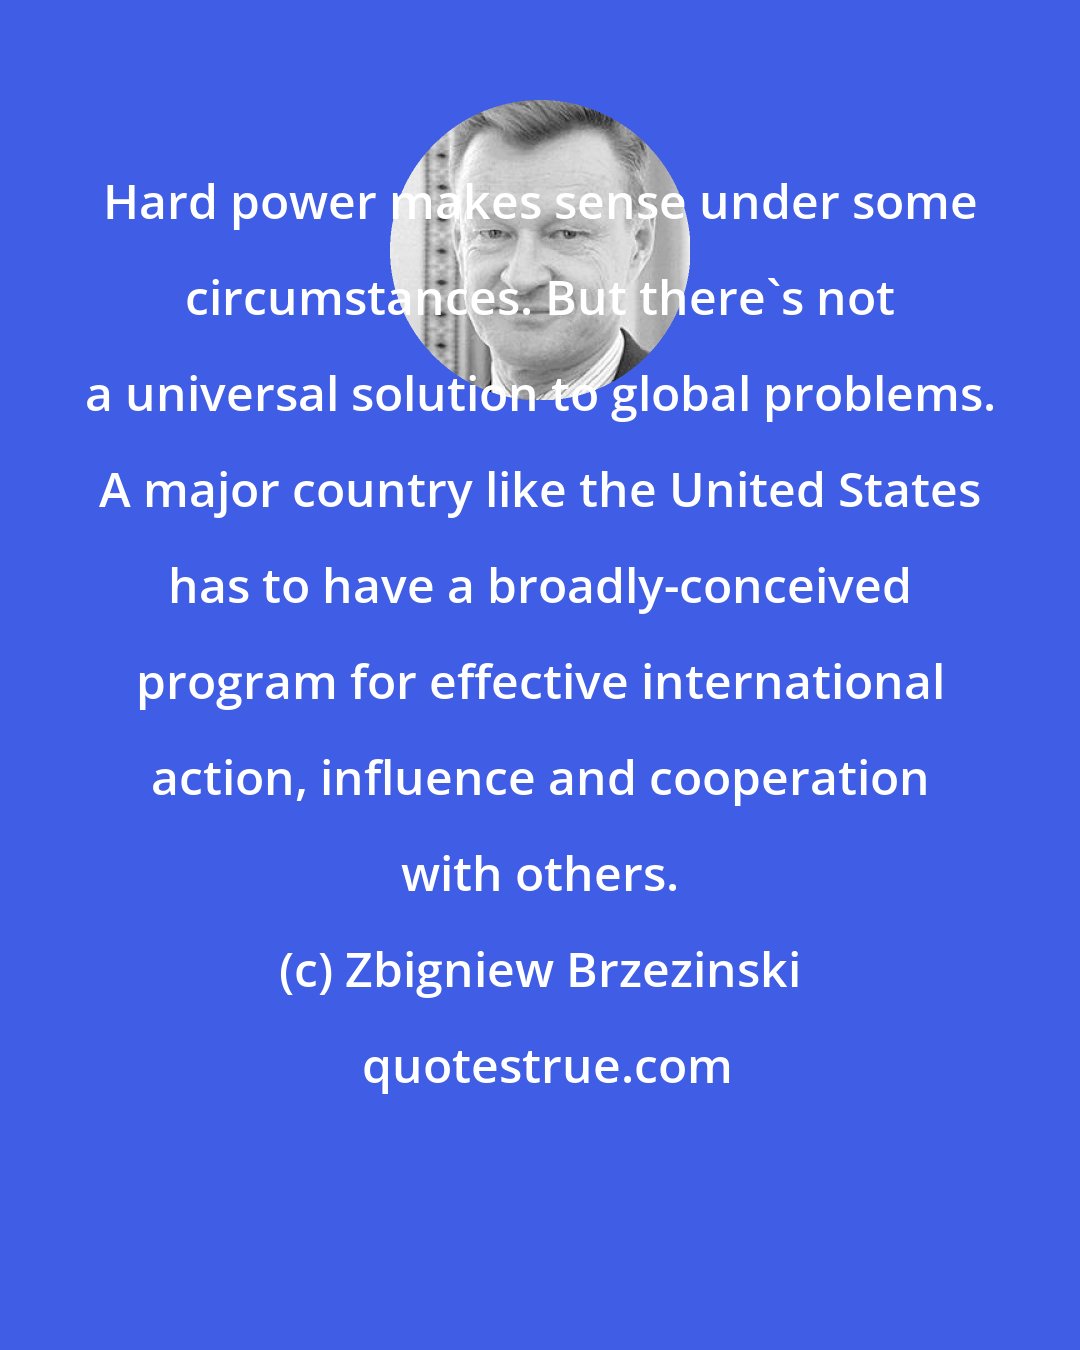 Zbigniew Brzezinski: Hard power makes sense under some circumstances. But there's not a universal solution to global problems. A major country like the United States has to have a broadly-conceived program for effective international action, influence and cooperation with others.